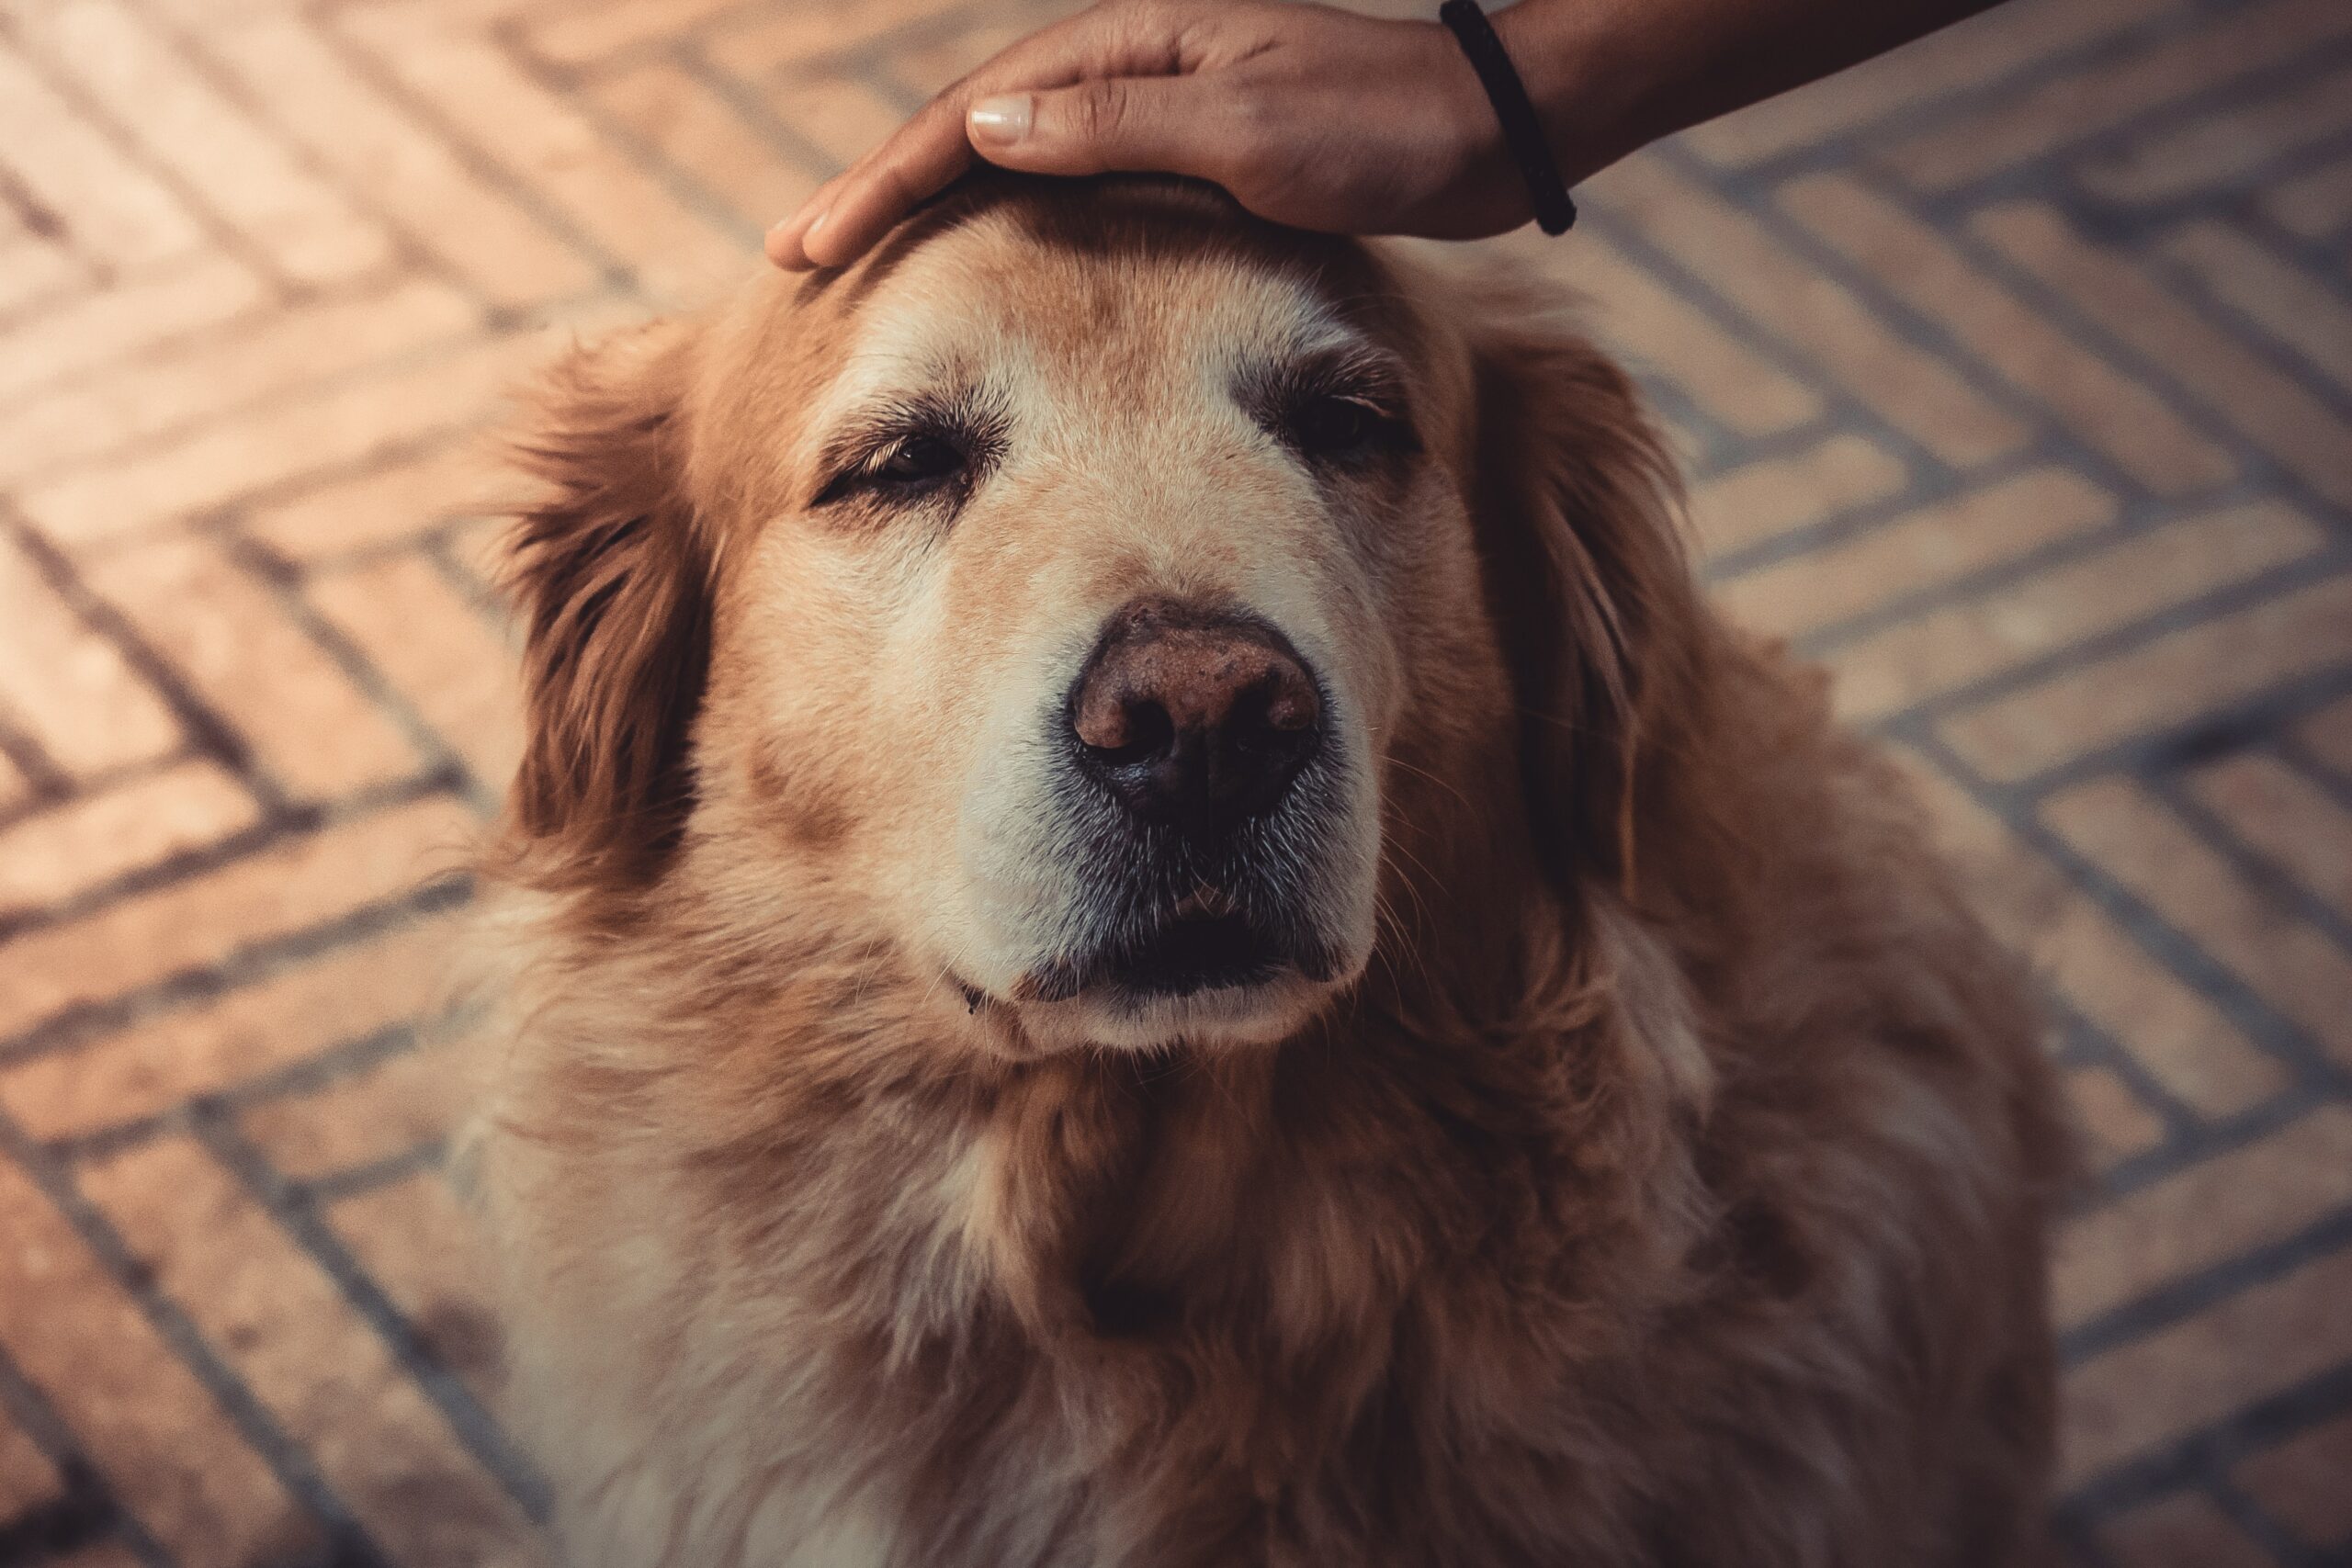 7 Tips to Help Your Aging Dog Live Their Best Life